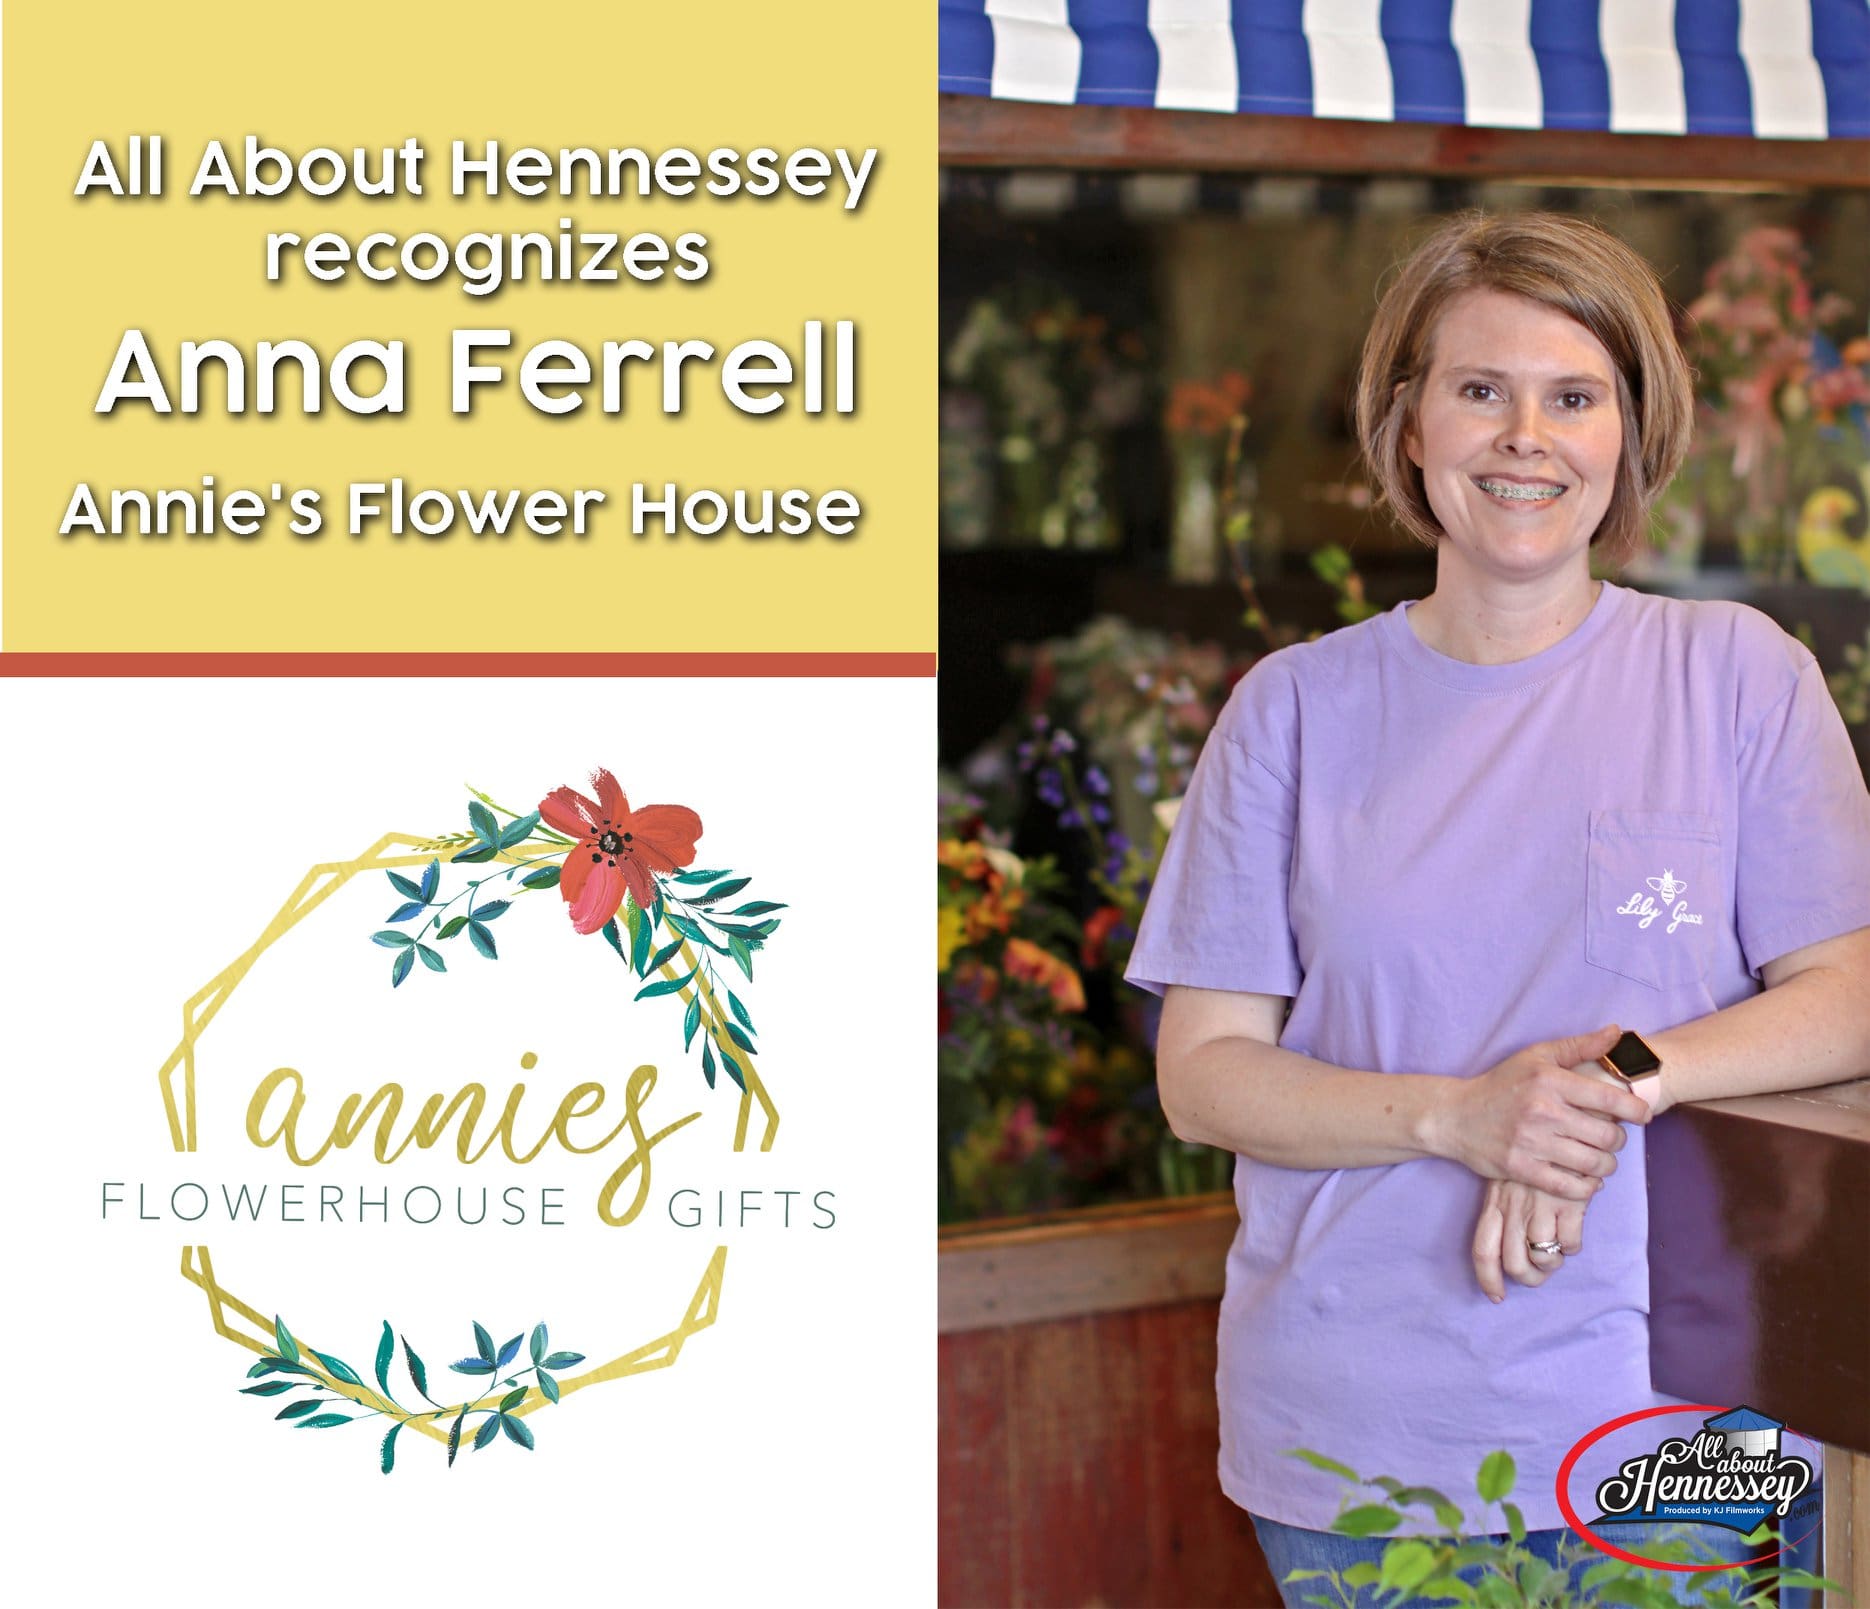 THIS WEEK ALL ABOUT HENNESSEY RECOGNIZES DR. ANNA FERRELL – ANNIE’S FLOWER HOUSE AS OUR WOMAN IN BUSINESS.